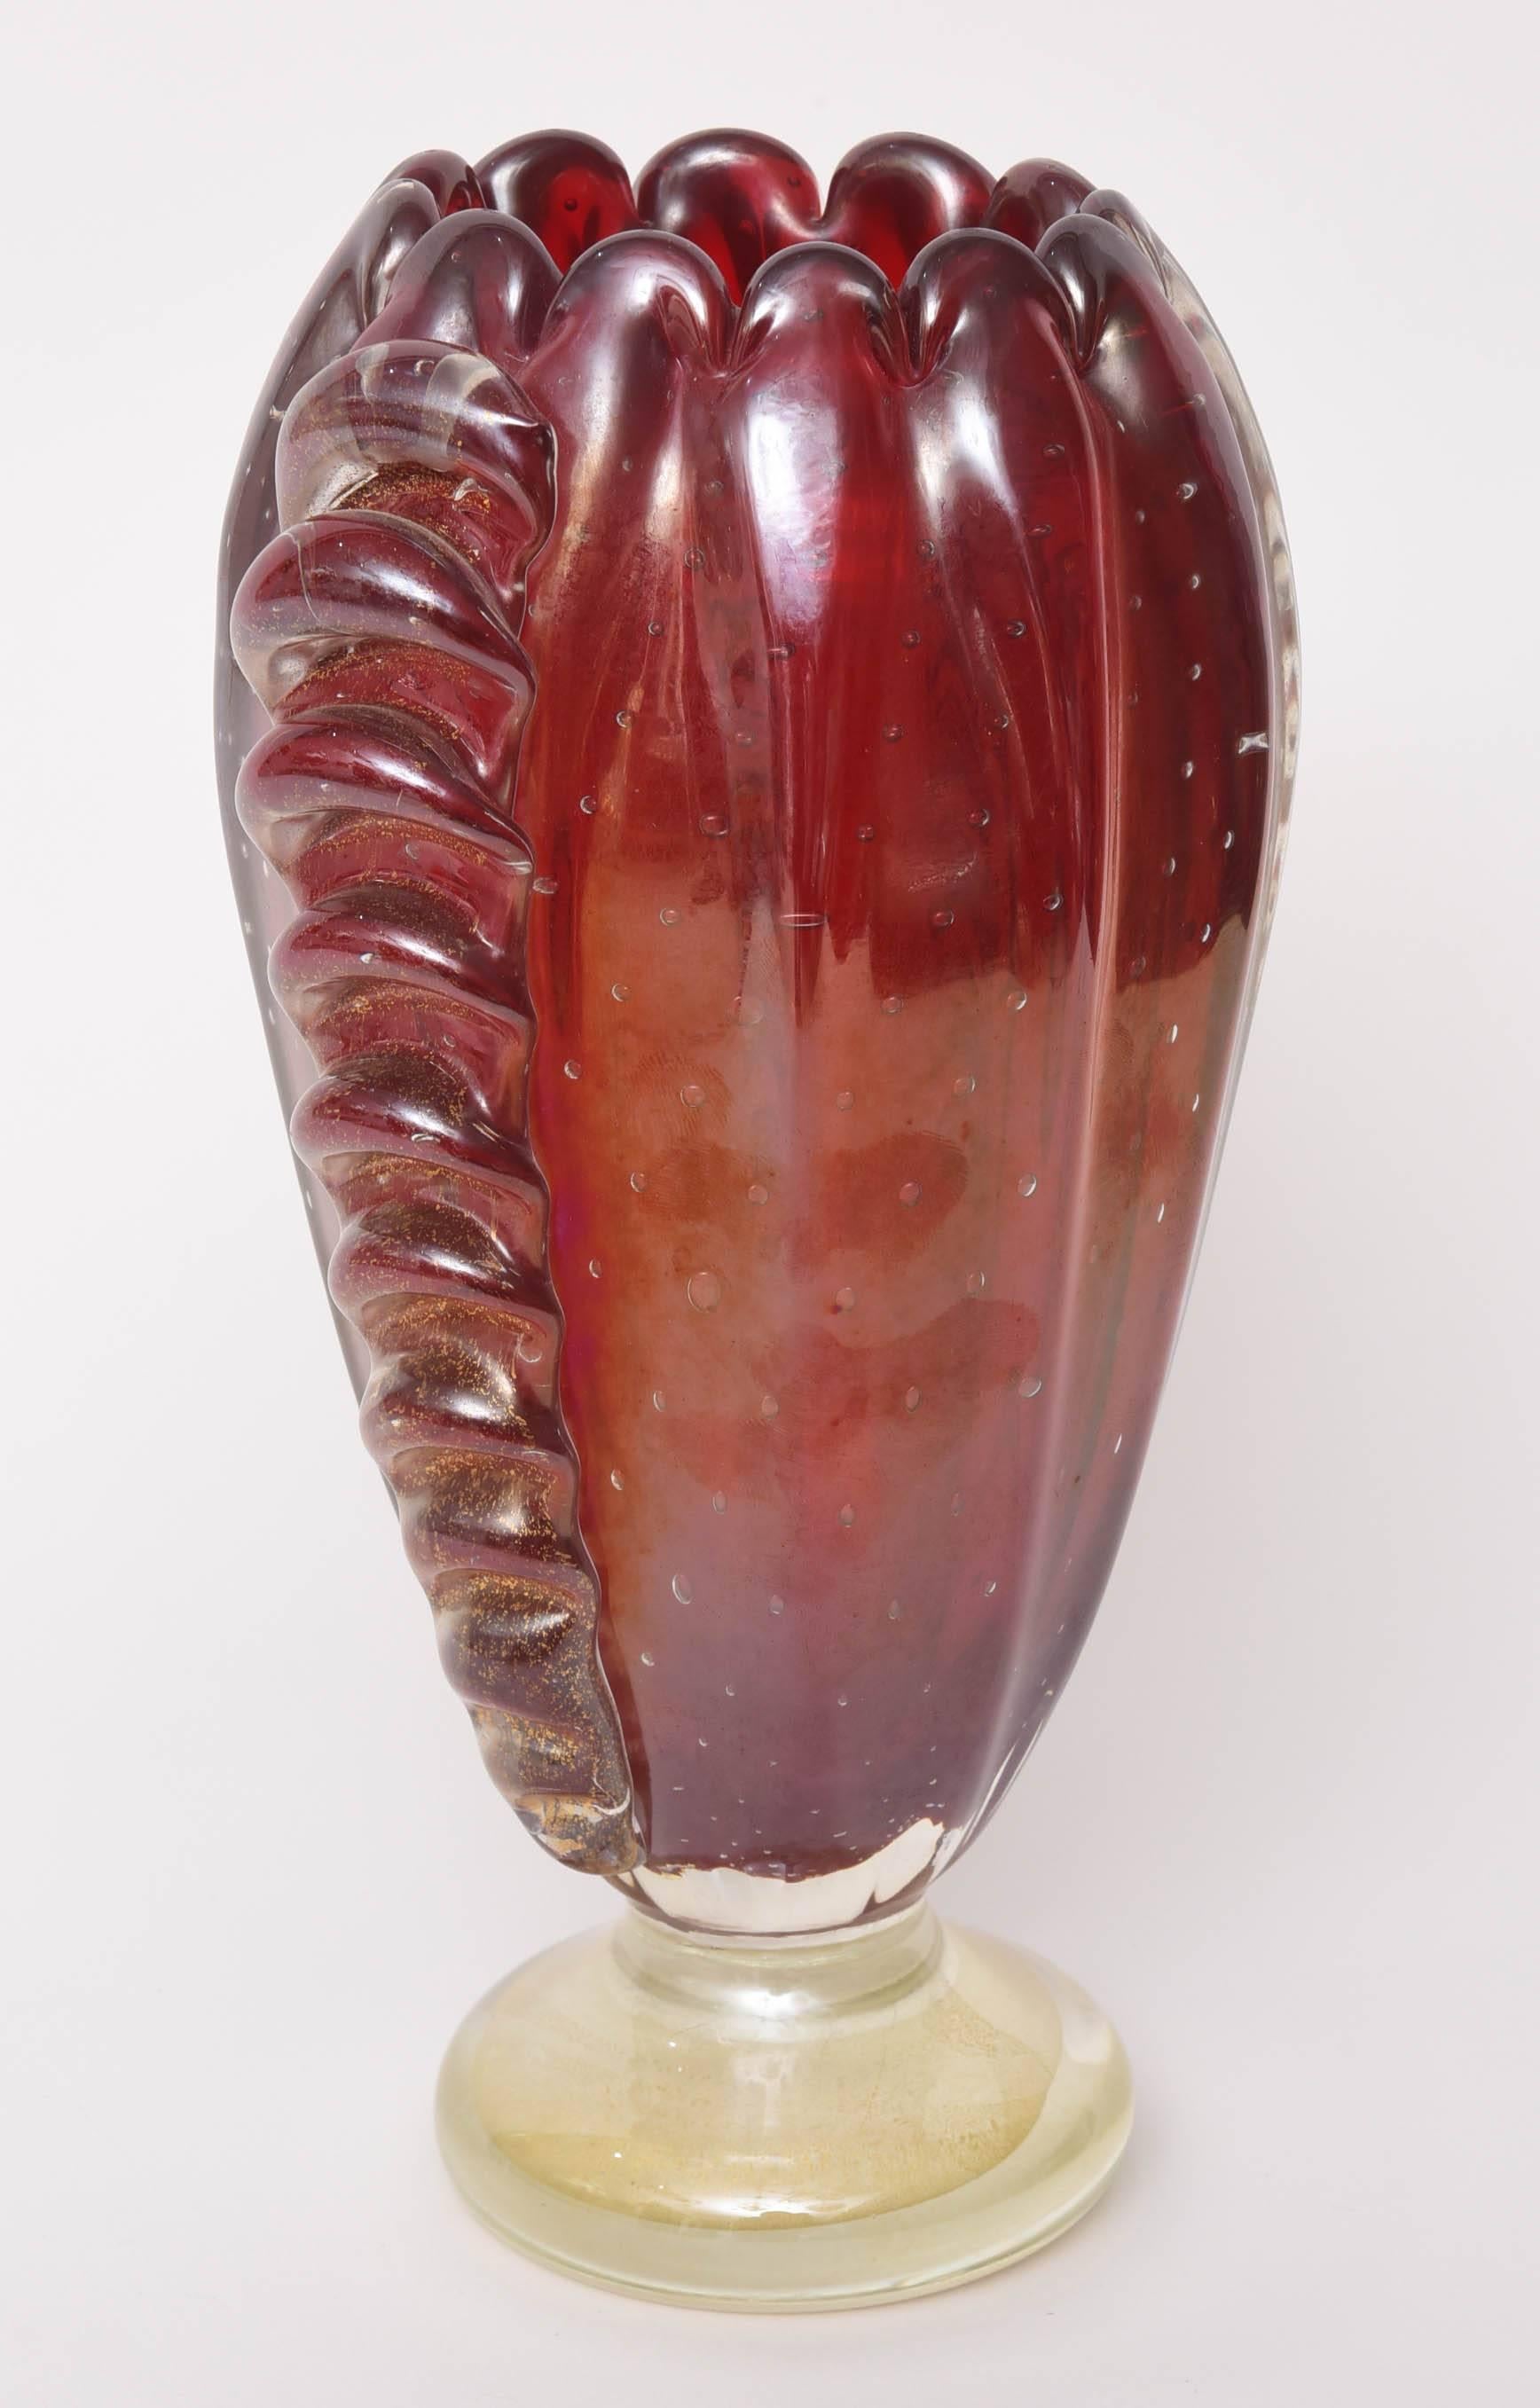 This amazing Art Deco vase was created by the iconic firm Barovier e Toso of Murano, Italy in the late 1930s to early 1940s. It is in the bullicante ruby red color which is achieved by a gold solution as a coloring agent and oro which is the gold